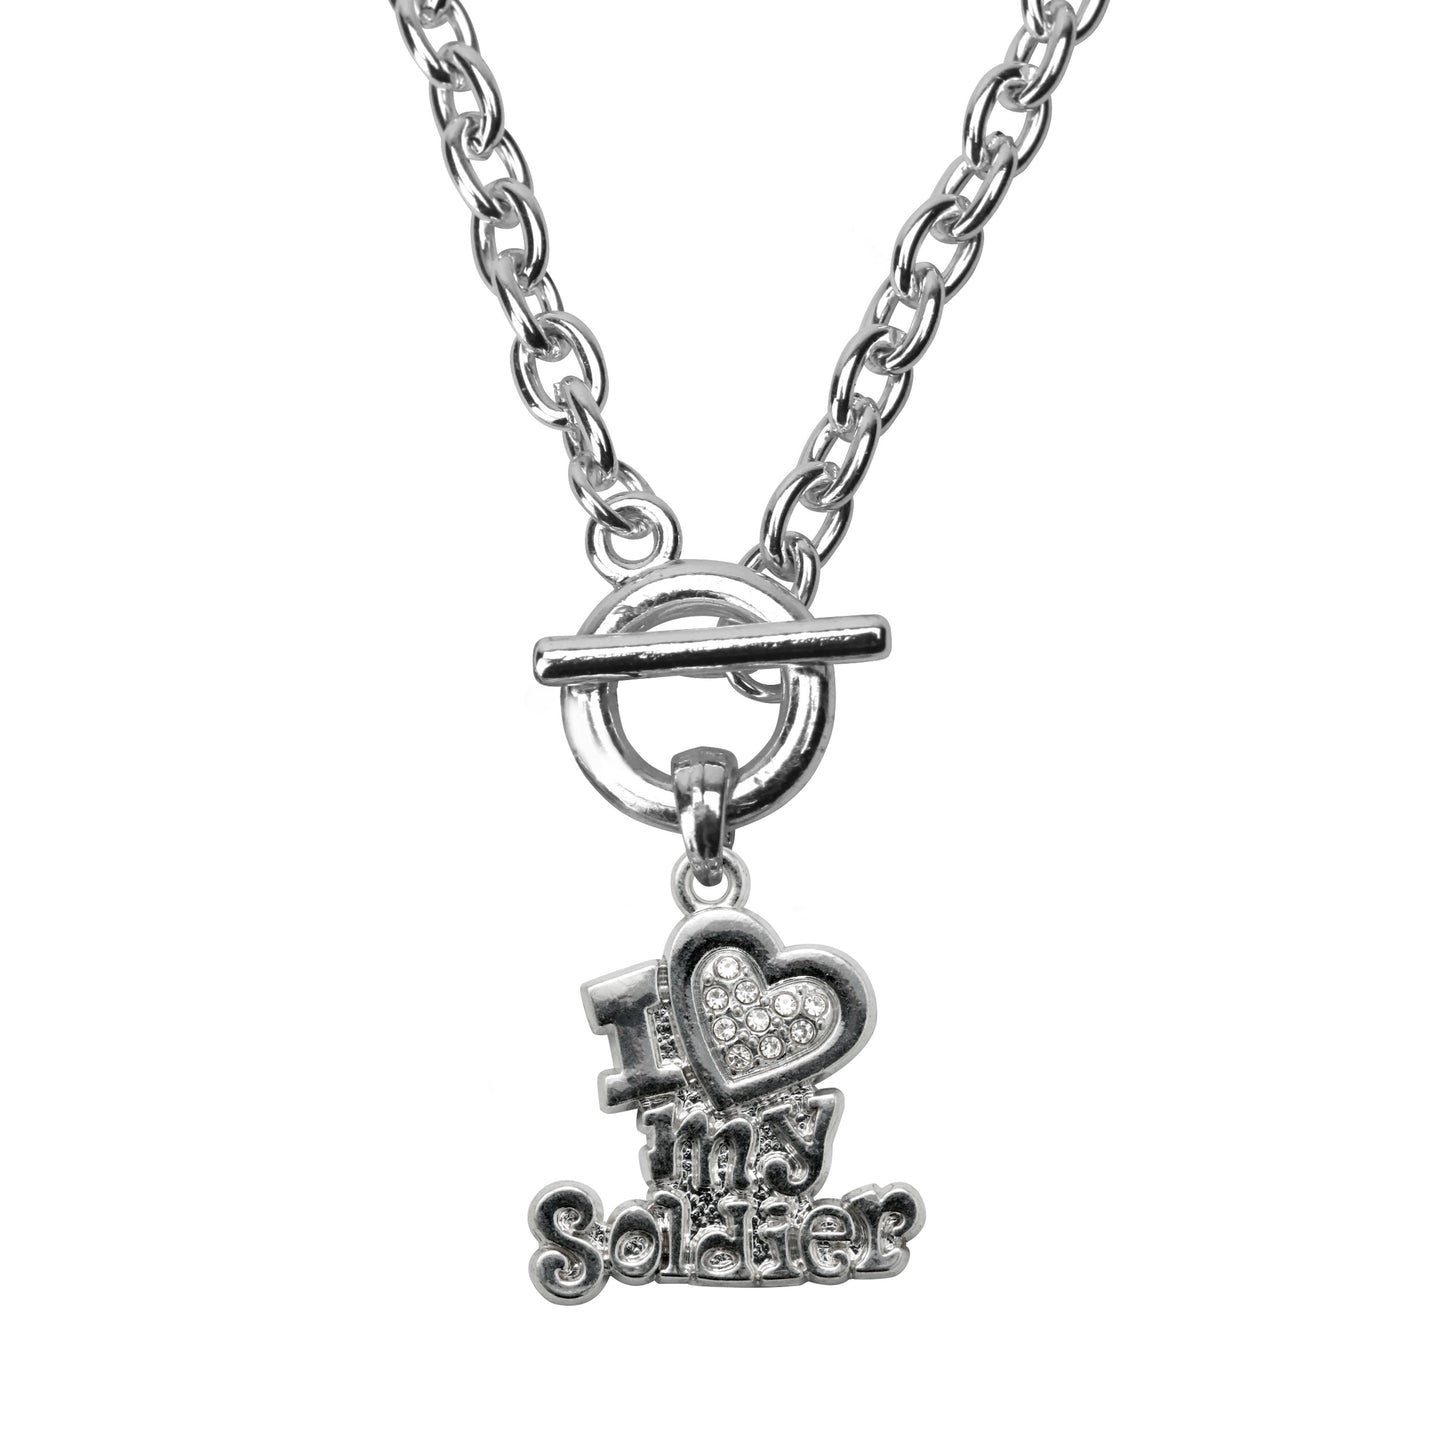 Silver I Love My Soldier Charm Toggle Necklace